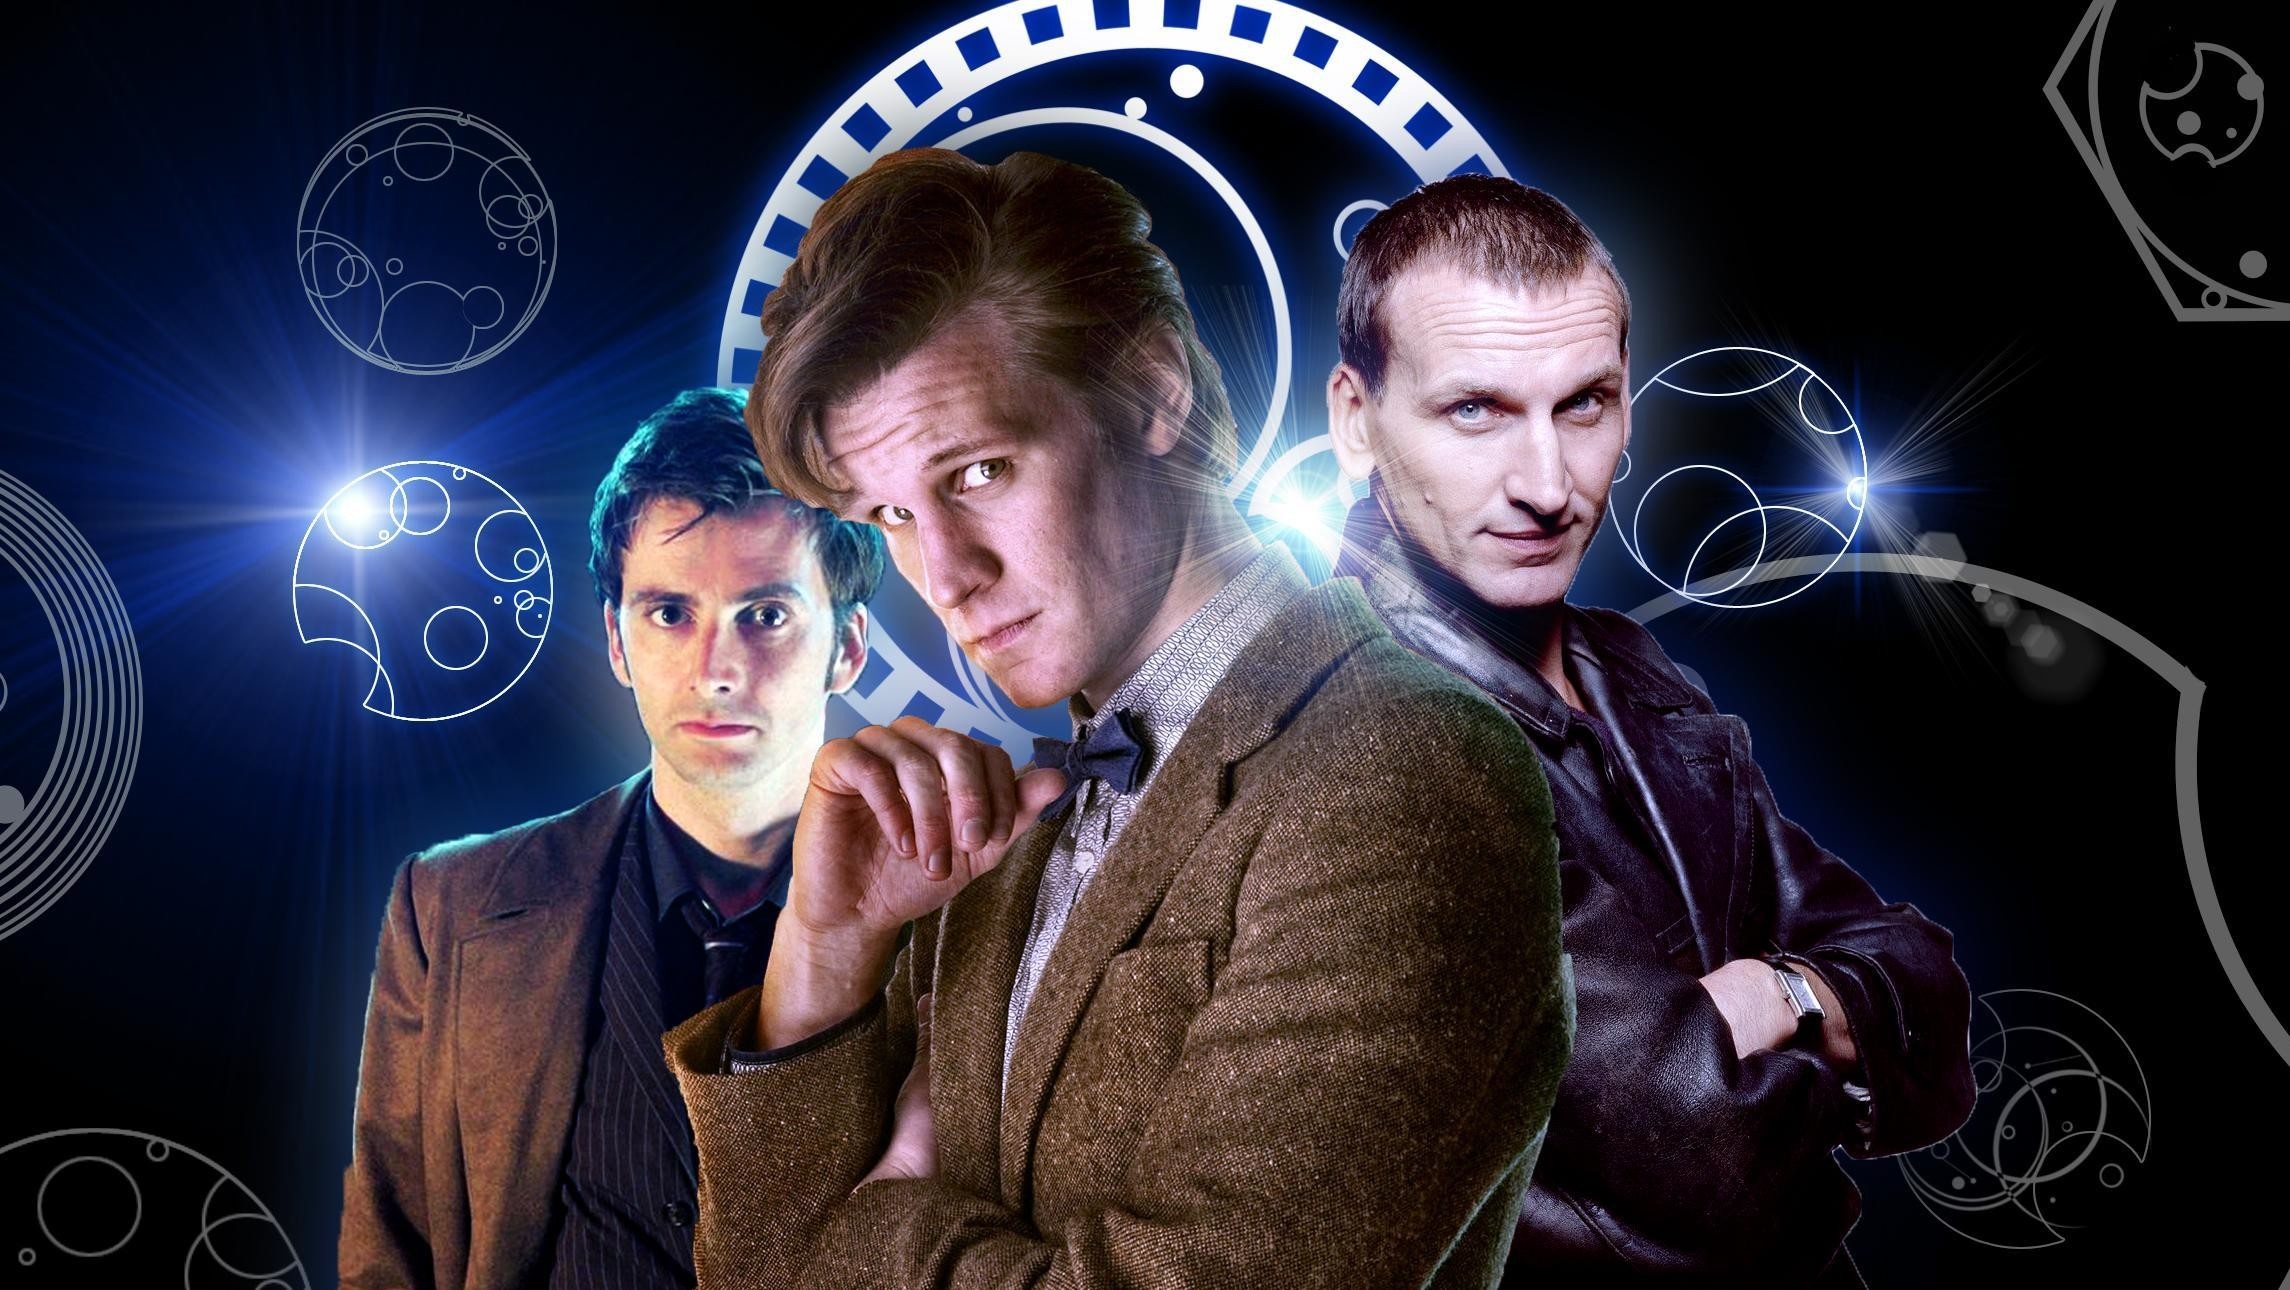 Eleventh Doctor, Wallpapers, Background pictures, Close-ups, 2290x1290 HD Desktop